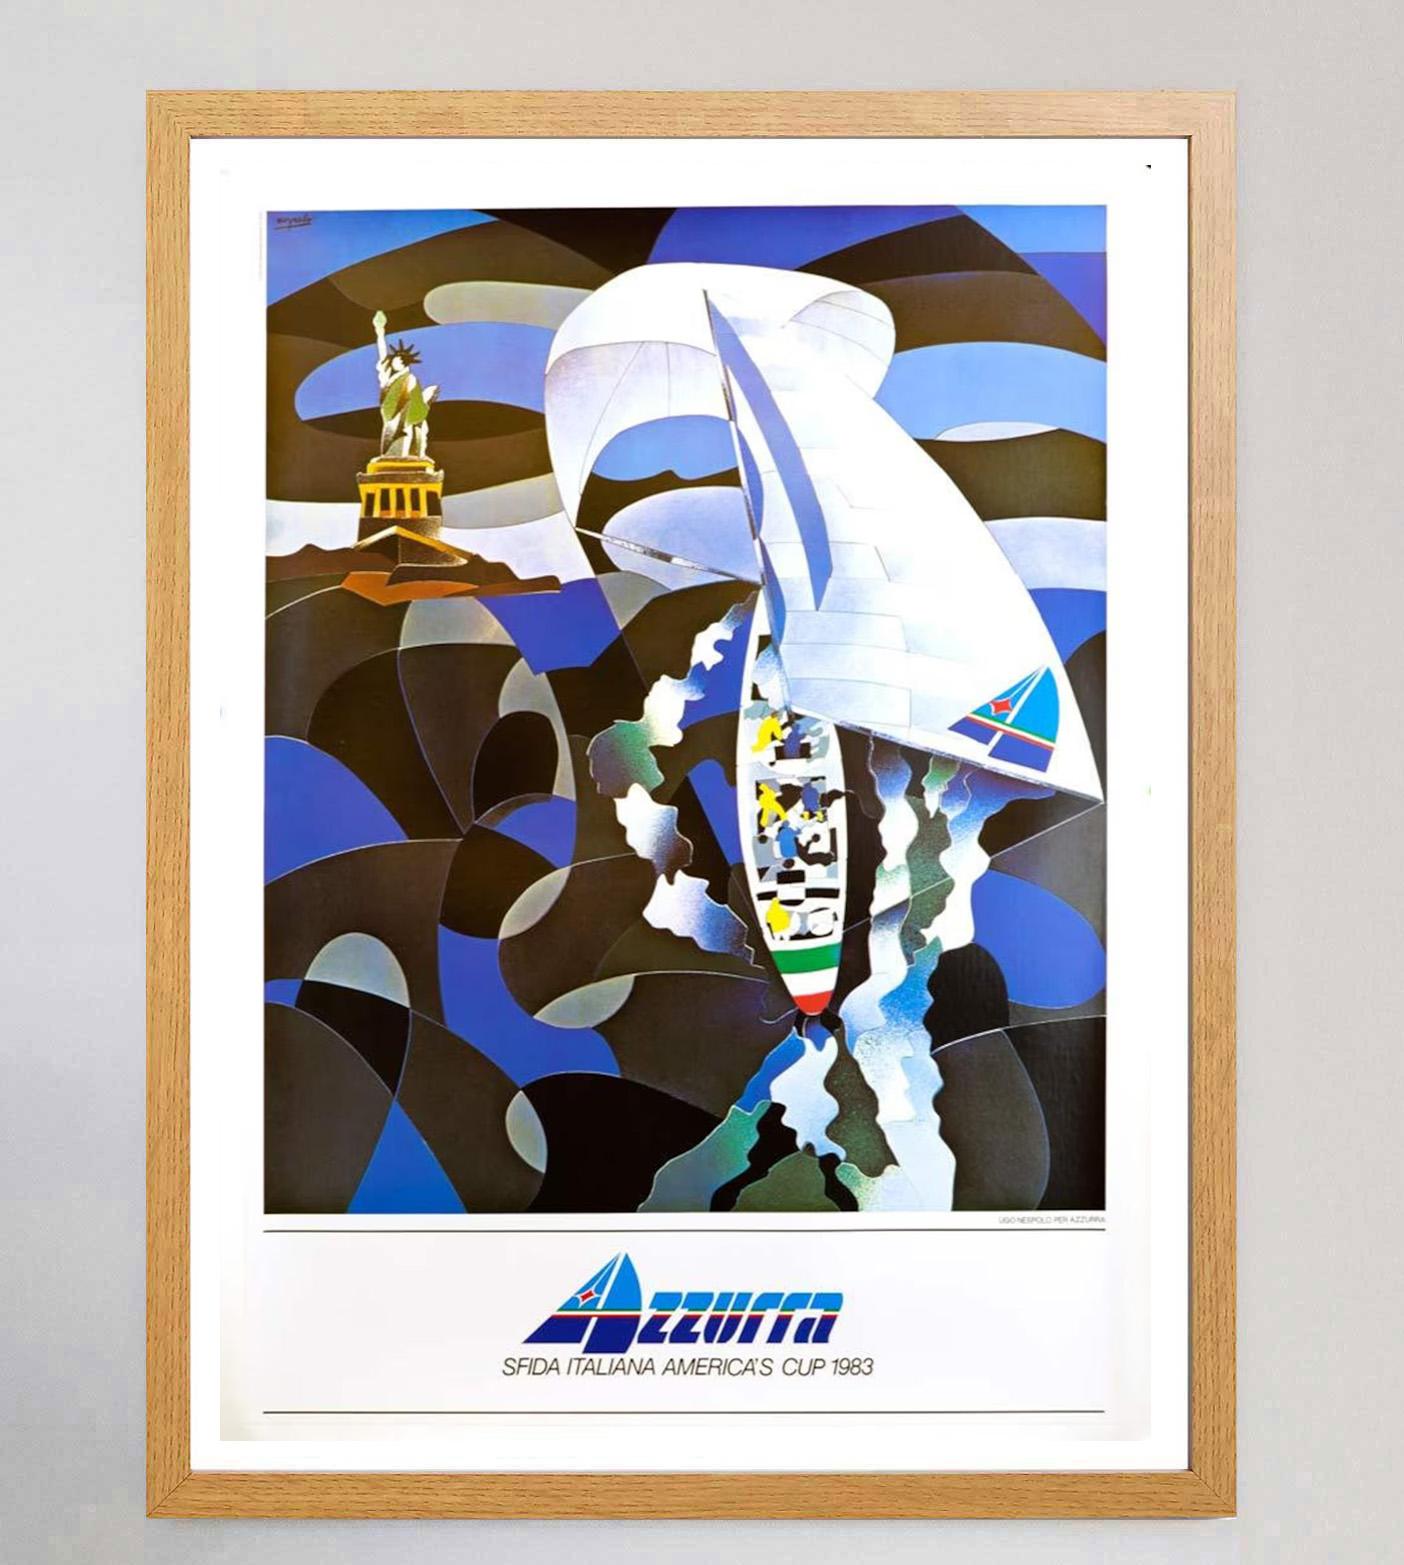 Italian 1983 America's Cup Original Vintage Poster For Sale